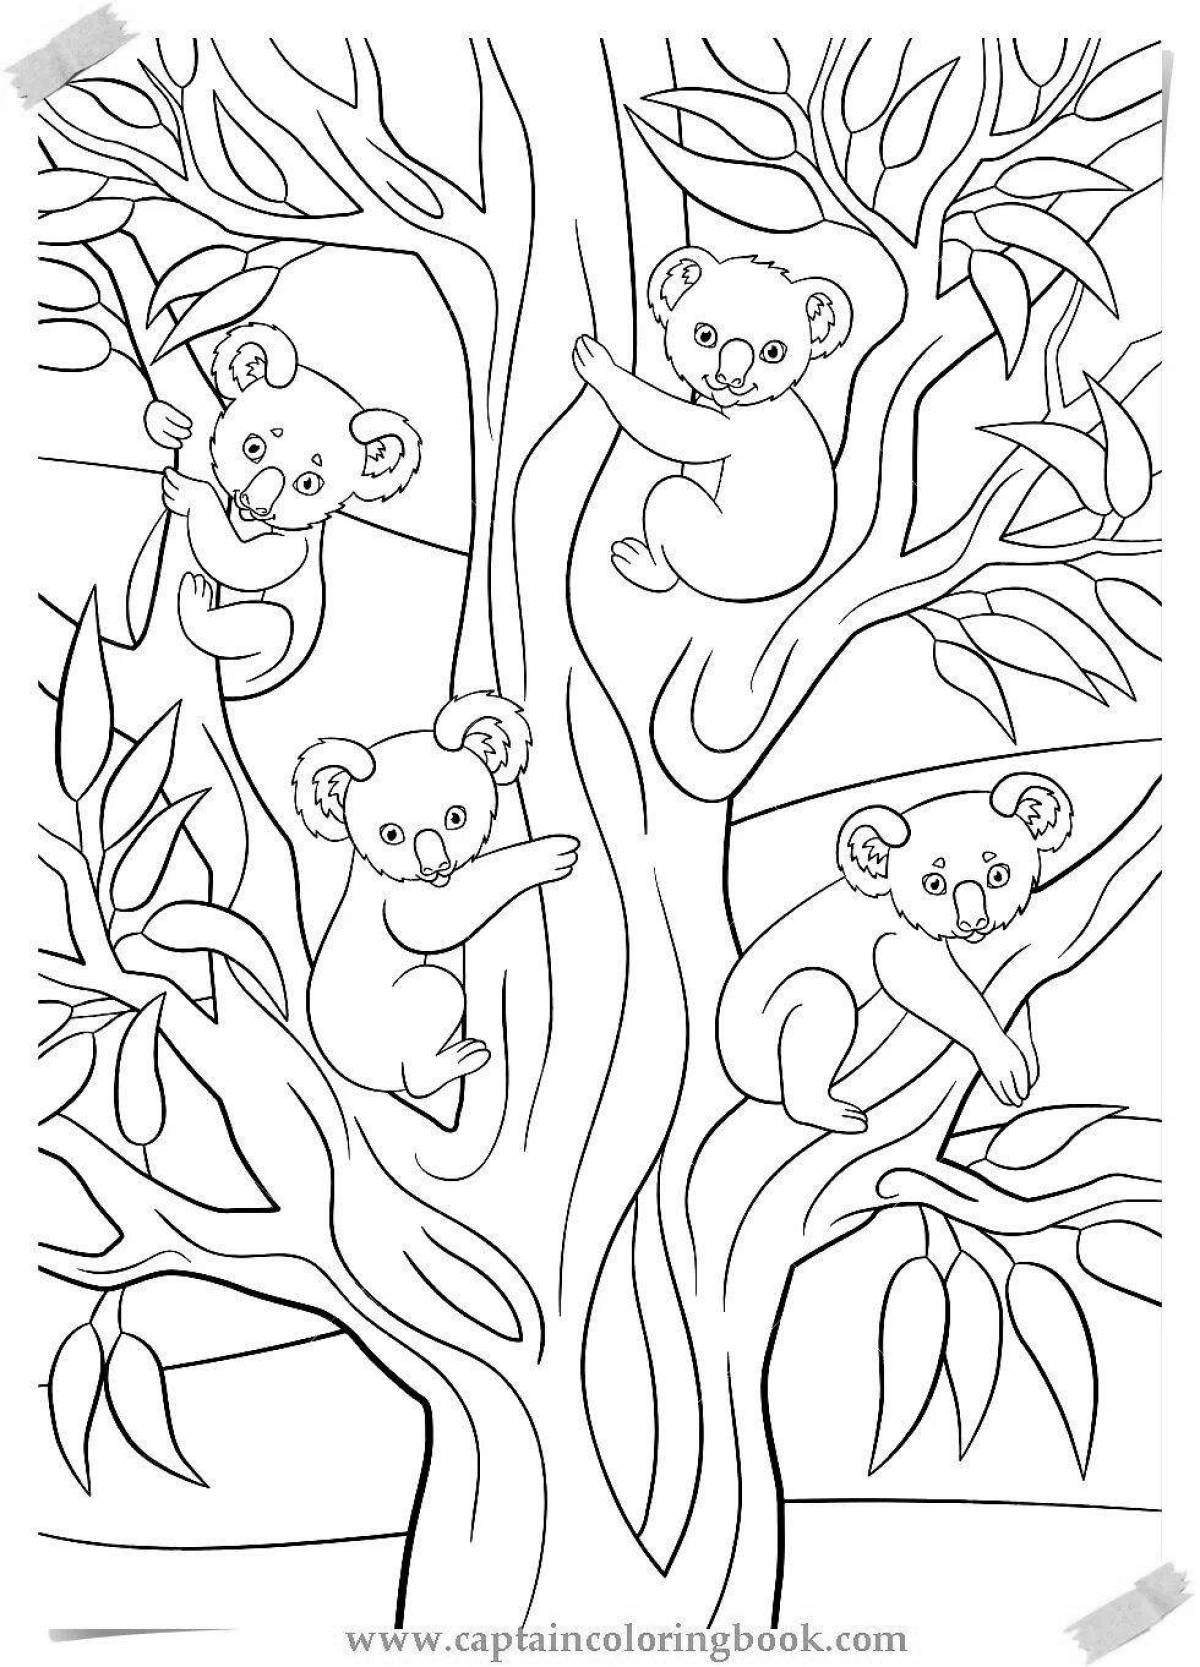 Coloring page dazzling eucalyptus tree